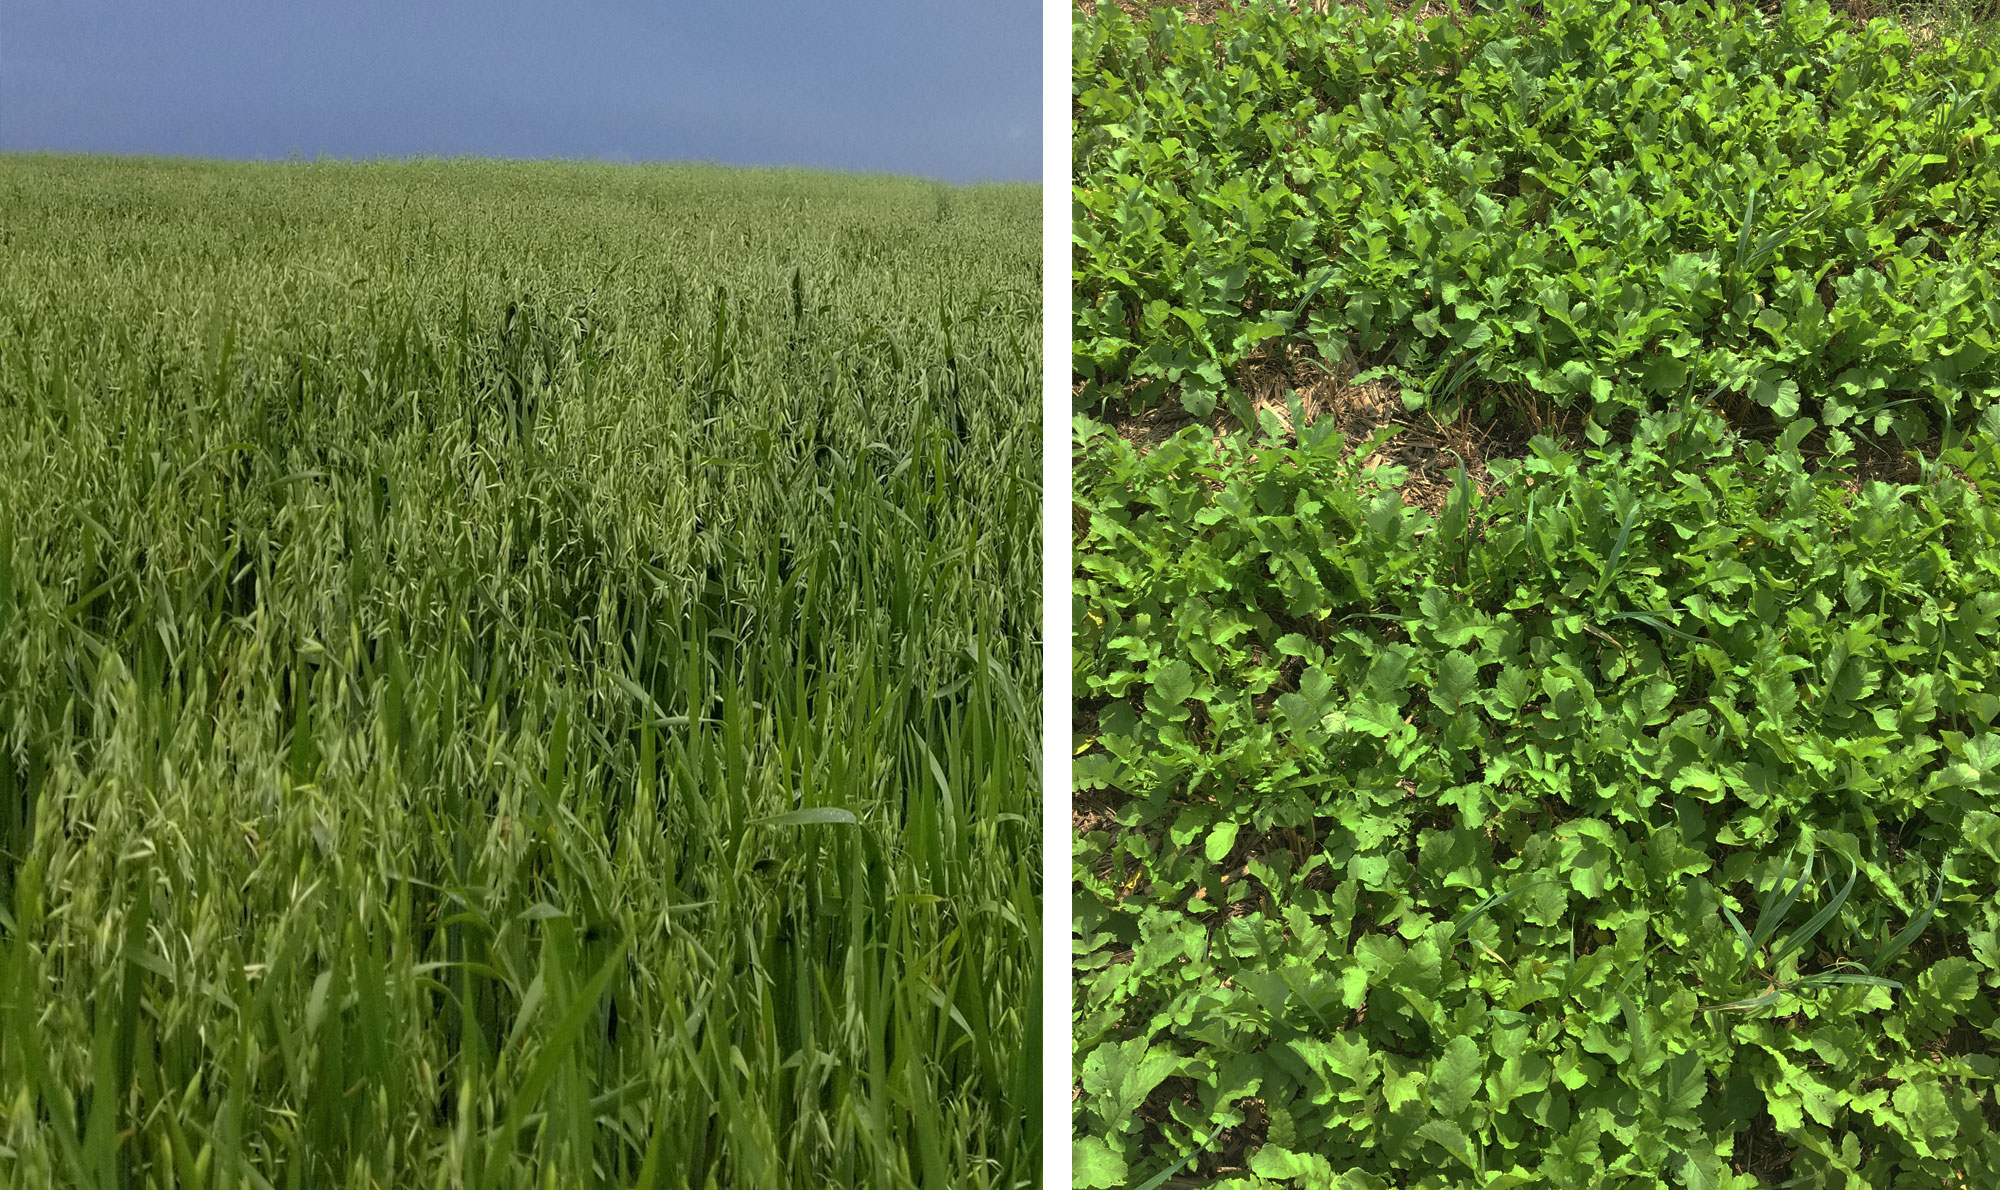 Two groups of cover crops. Left: Oats. Right: Radish.